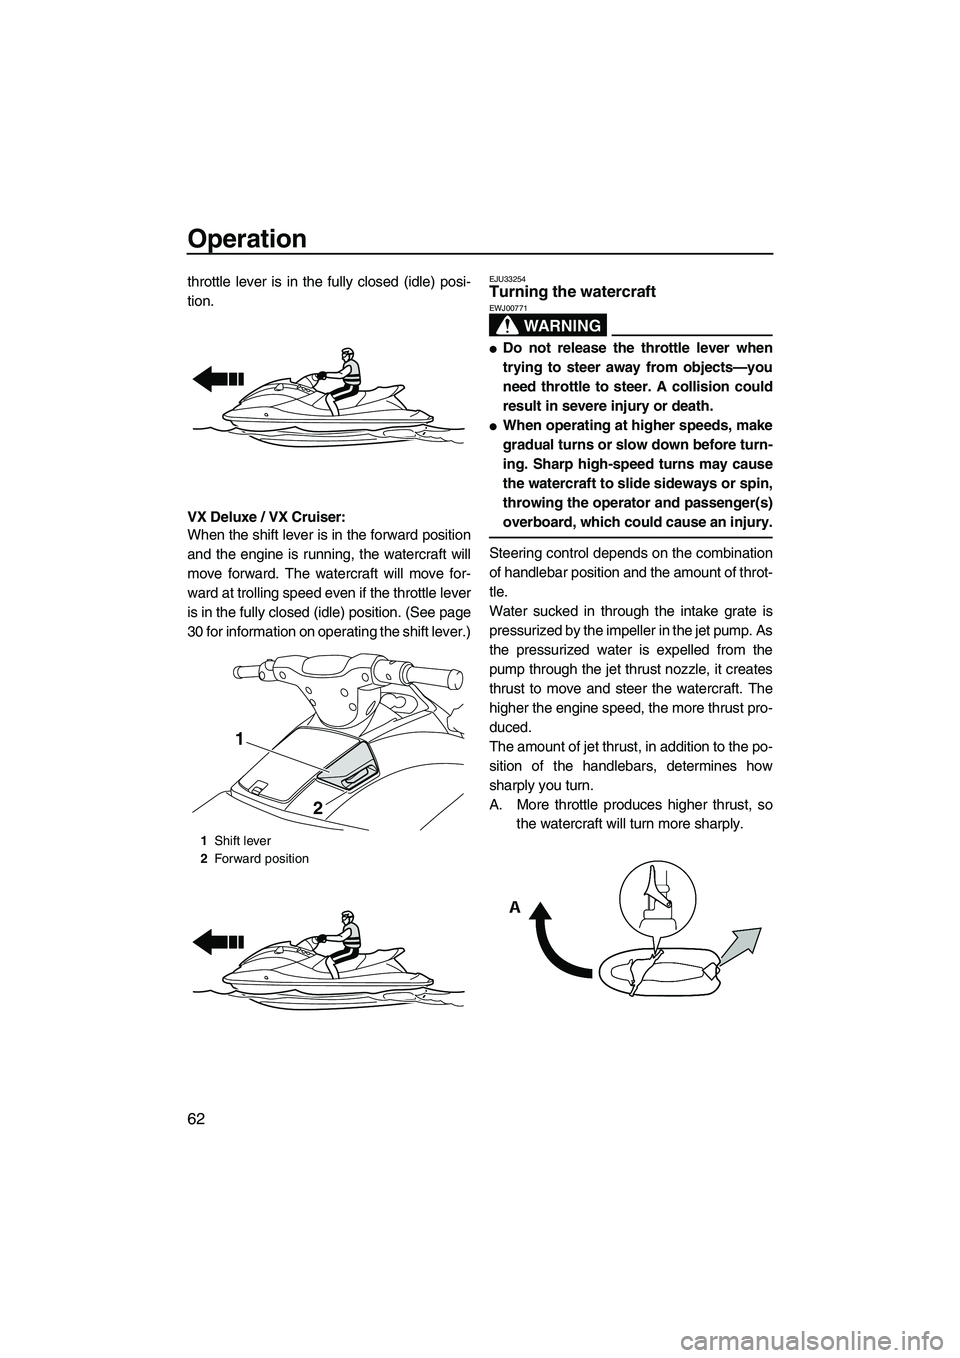 YAMAHA VX DELUXE 2013  Owners Manual Operation
62
throttle lever is in the fully closed (idle) posi-
tion.
VX Deluxe / VX Cruiser: 
When the shift lever is in the forward position
and the engine is running, the watercraft will
move forwa